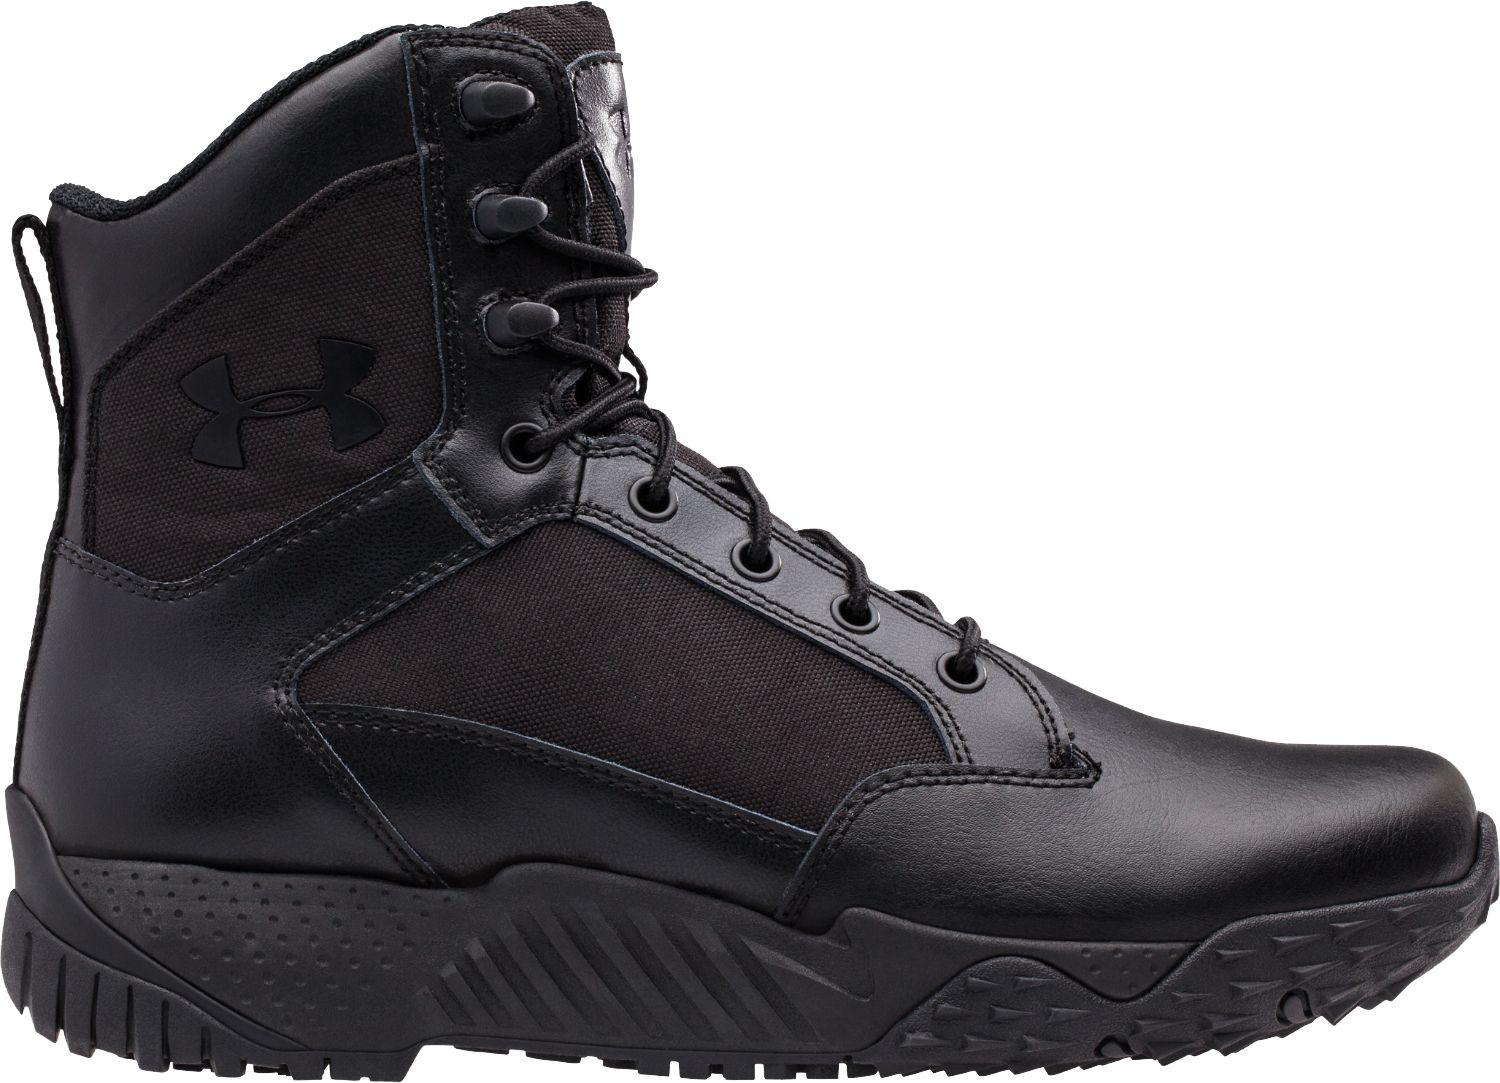 Wide US Under Armour Men's Stellar Tac Military & Tactical Boot Black 2E 